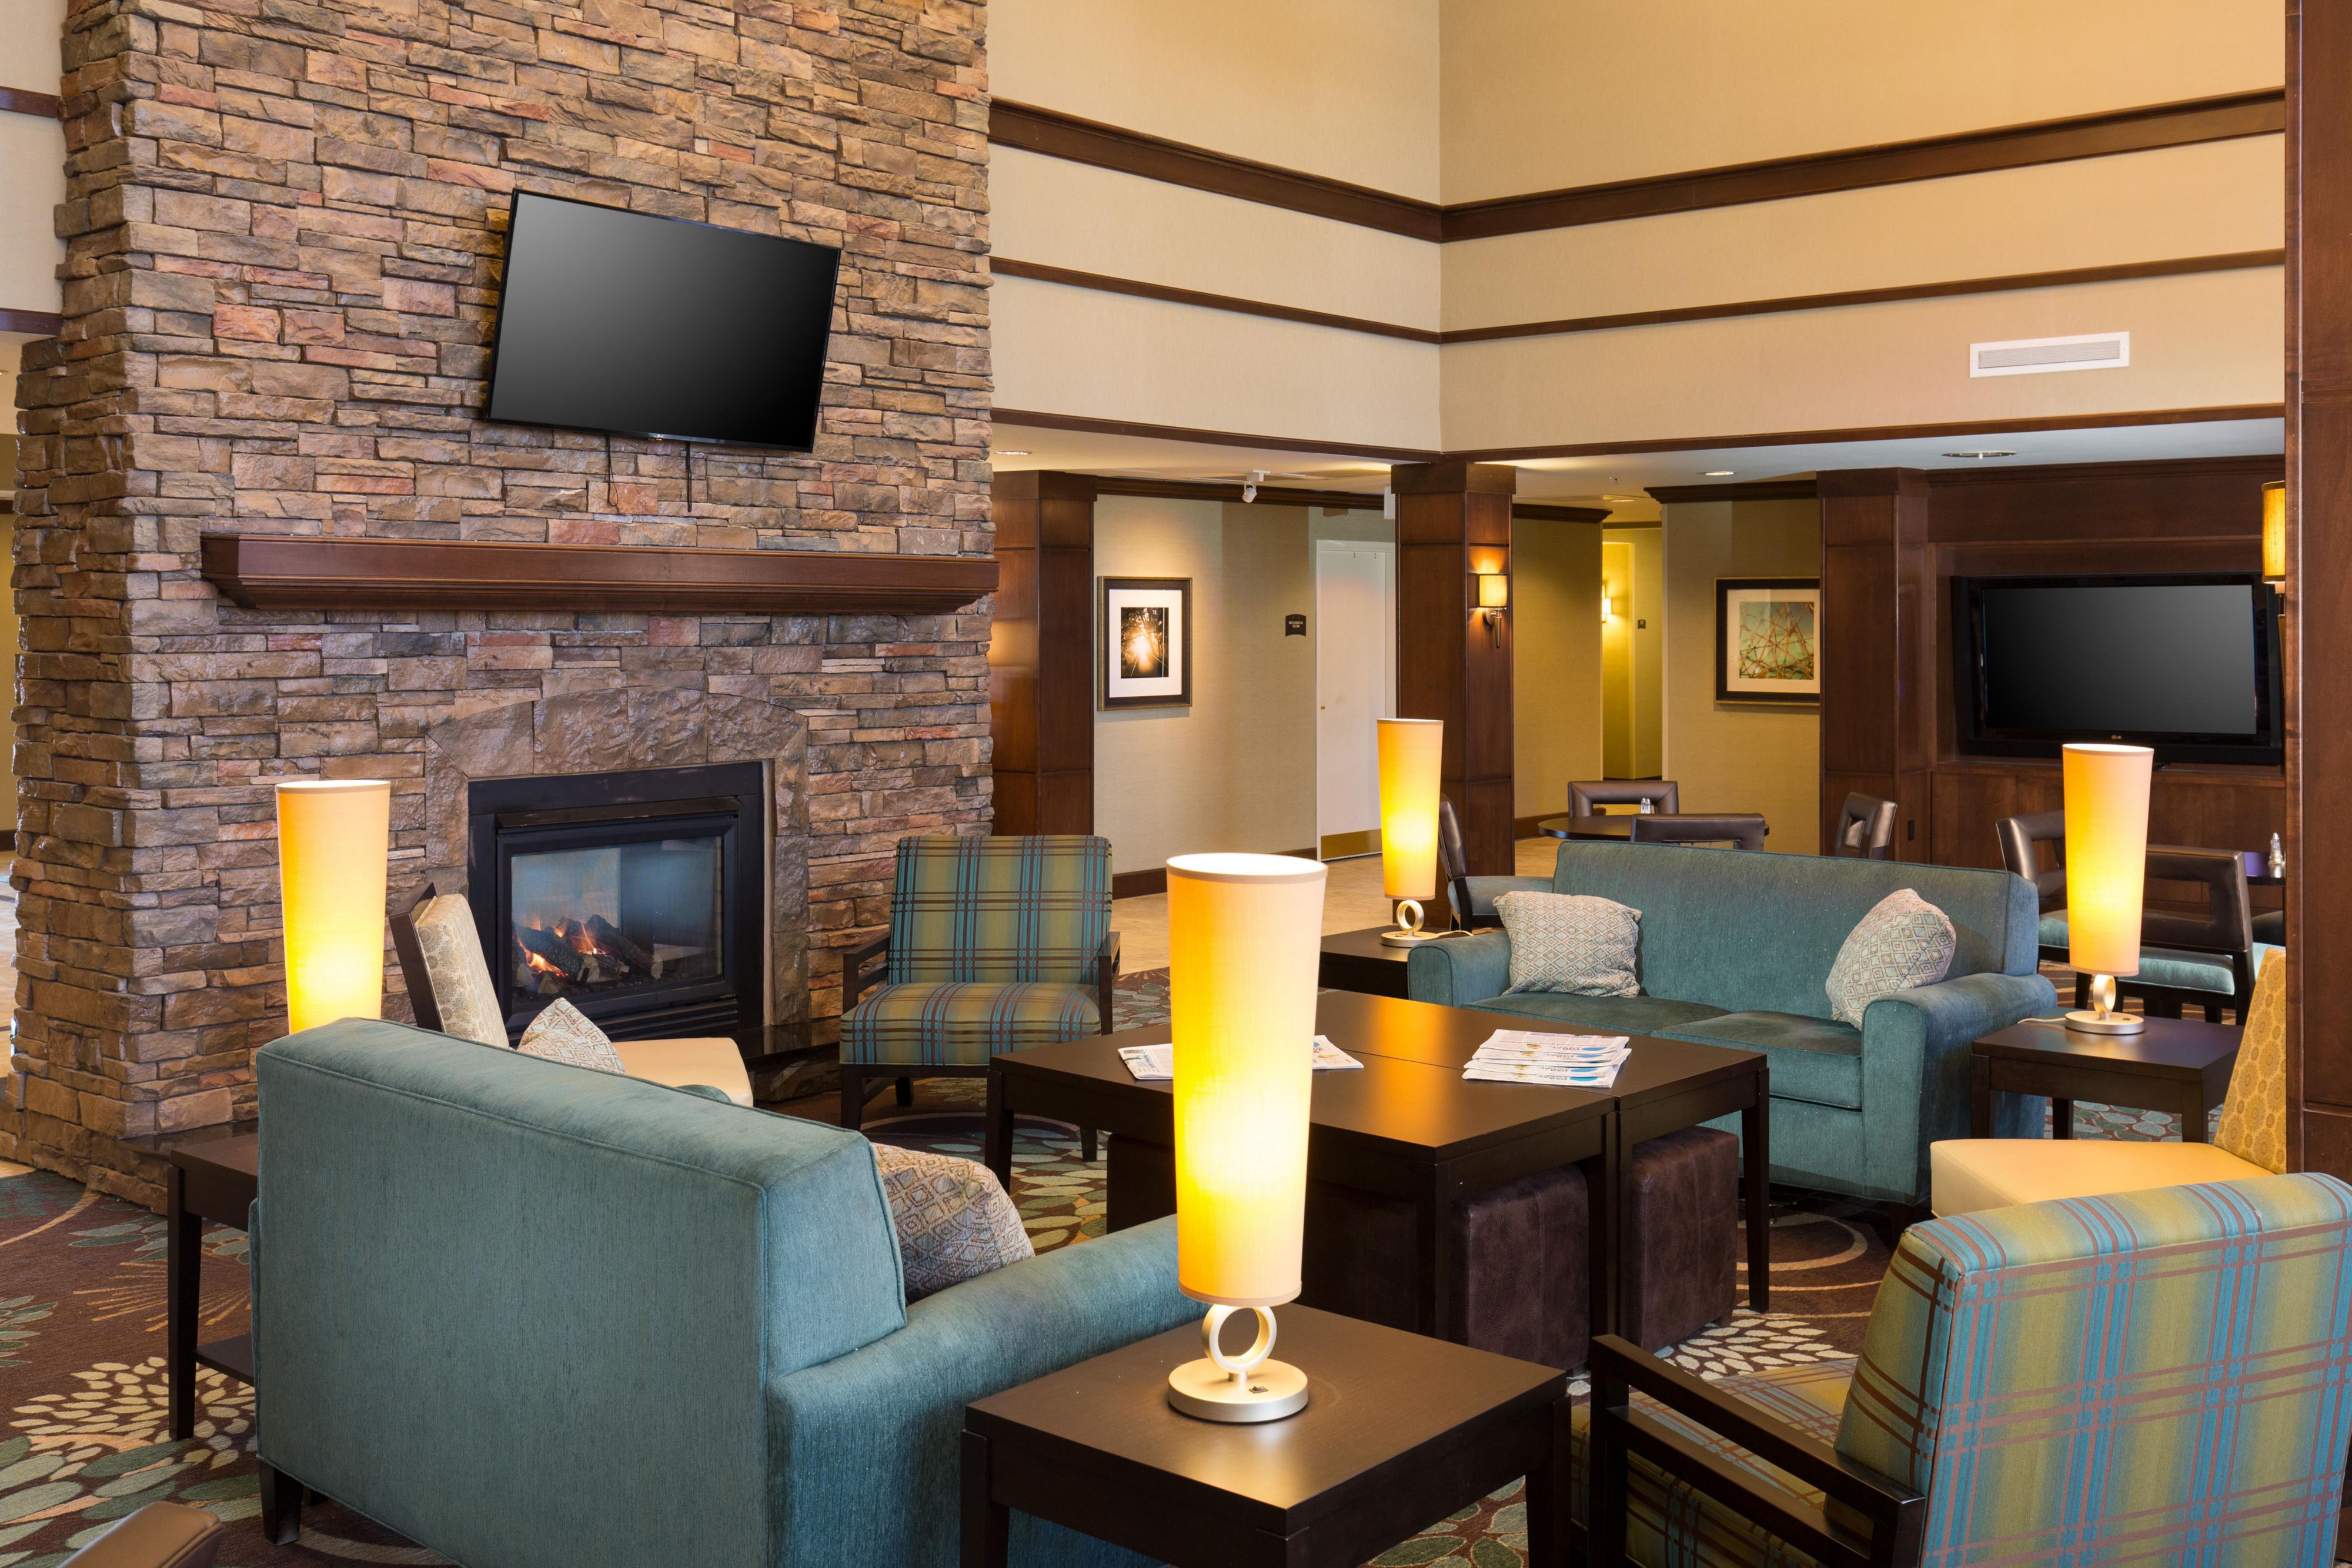 Relax, it is on us.  Unwind over complimentary food and drinks three days a week, Monday, Tuesday and Wednesday 5:30pm-7pm. Spend time visiting with family, friends, and coworkers by the fire in our relaxing lobby spaces.